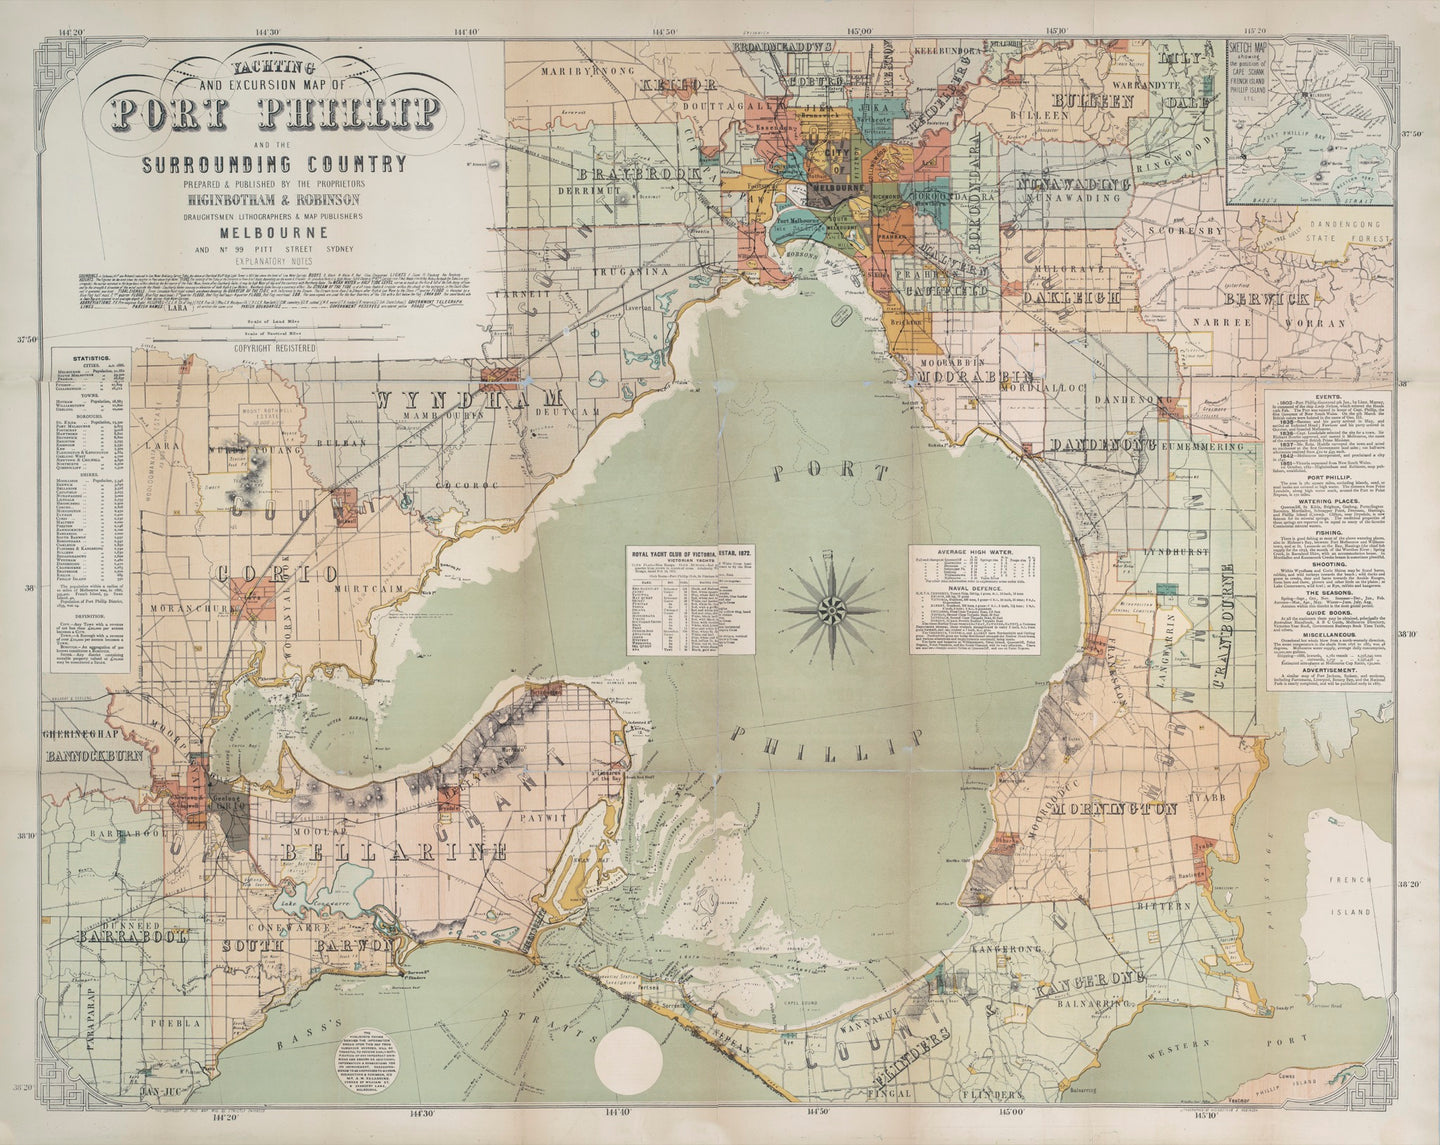 Yachting and Excursion Map of Port Phillip and the Surrounding Country